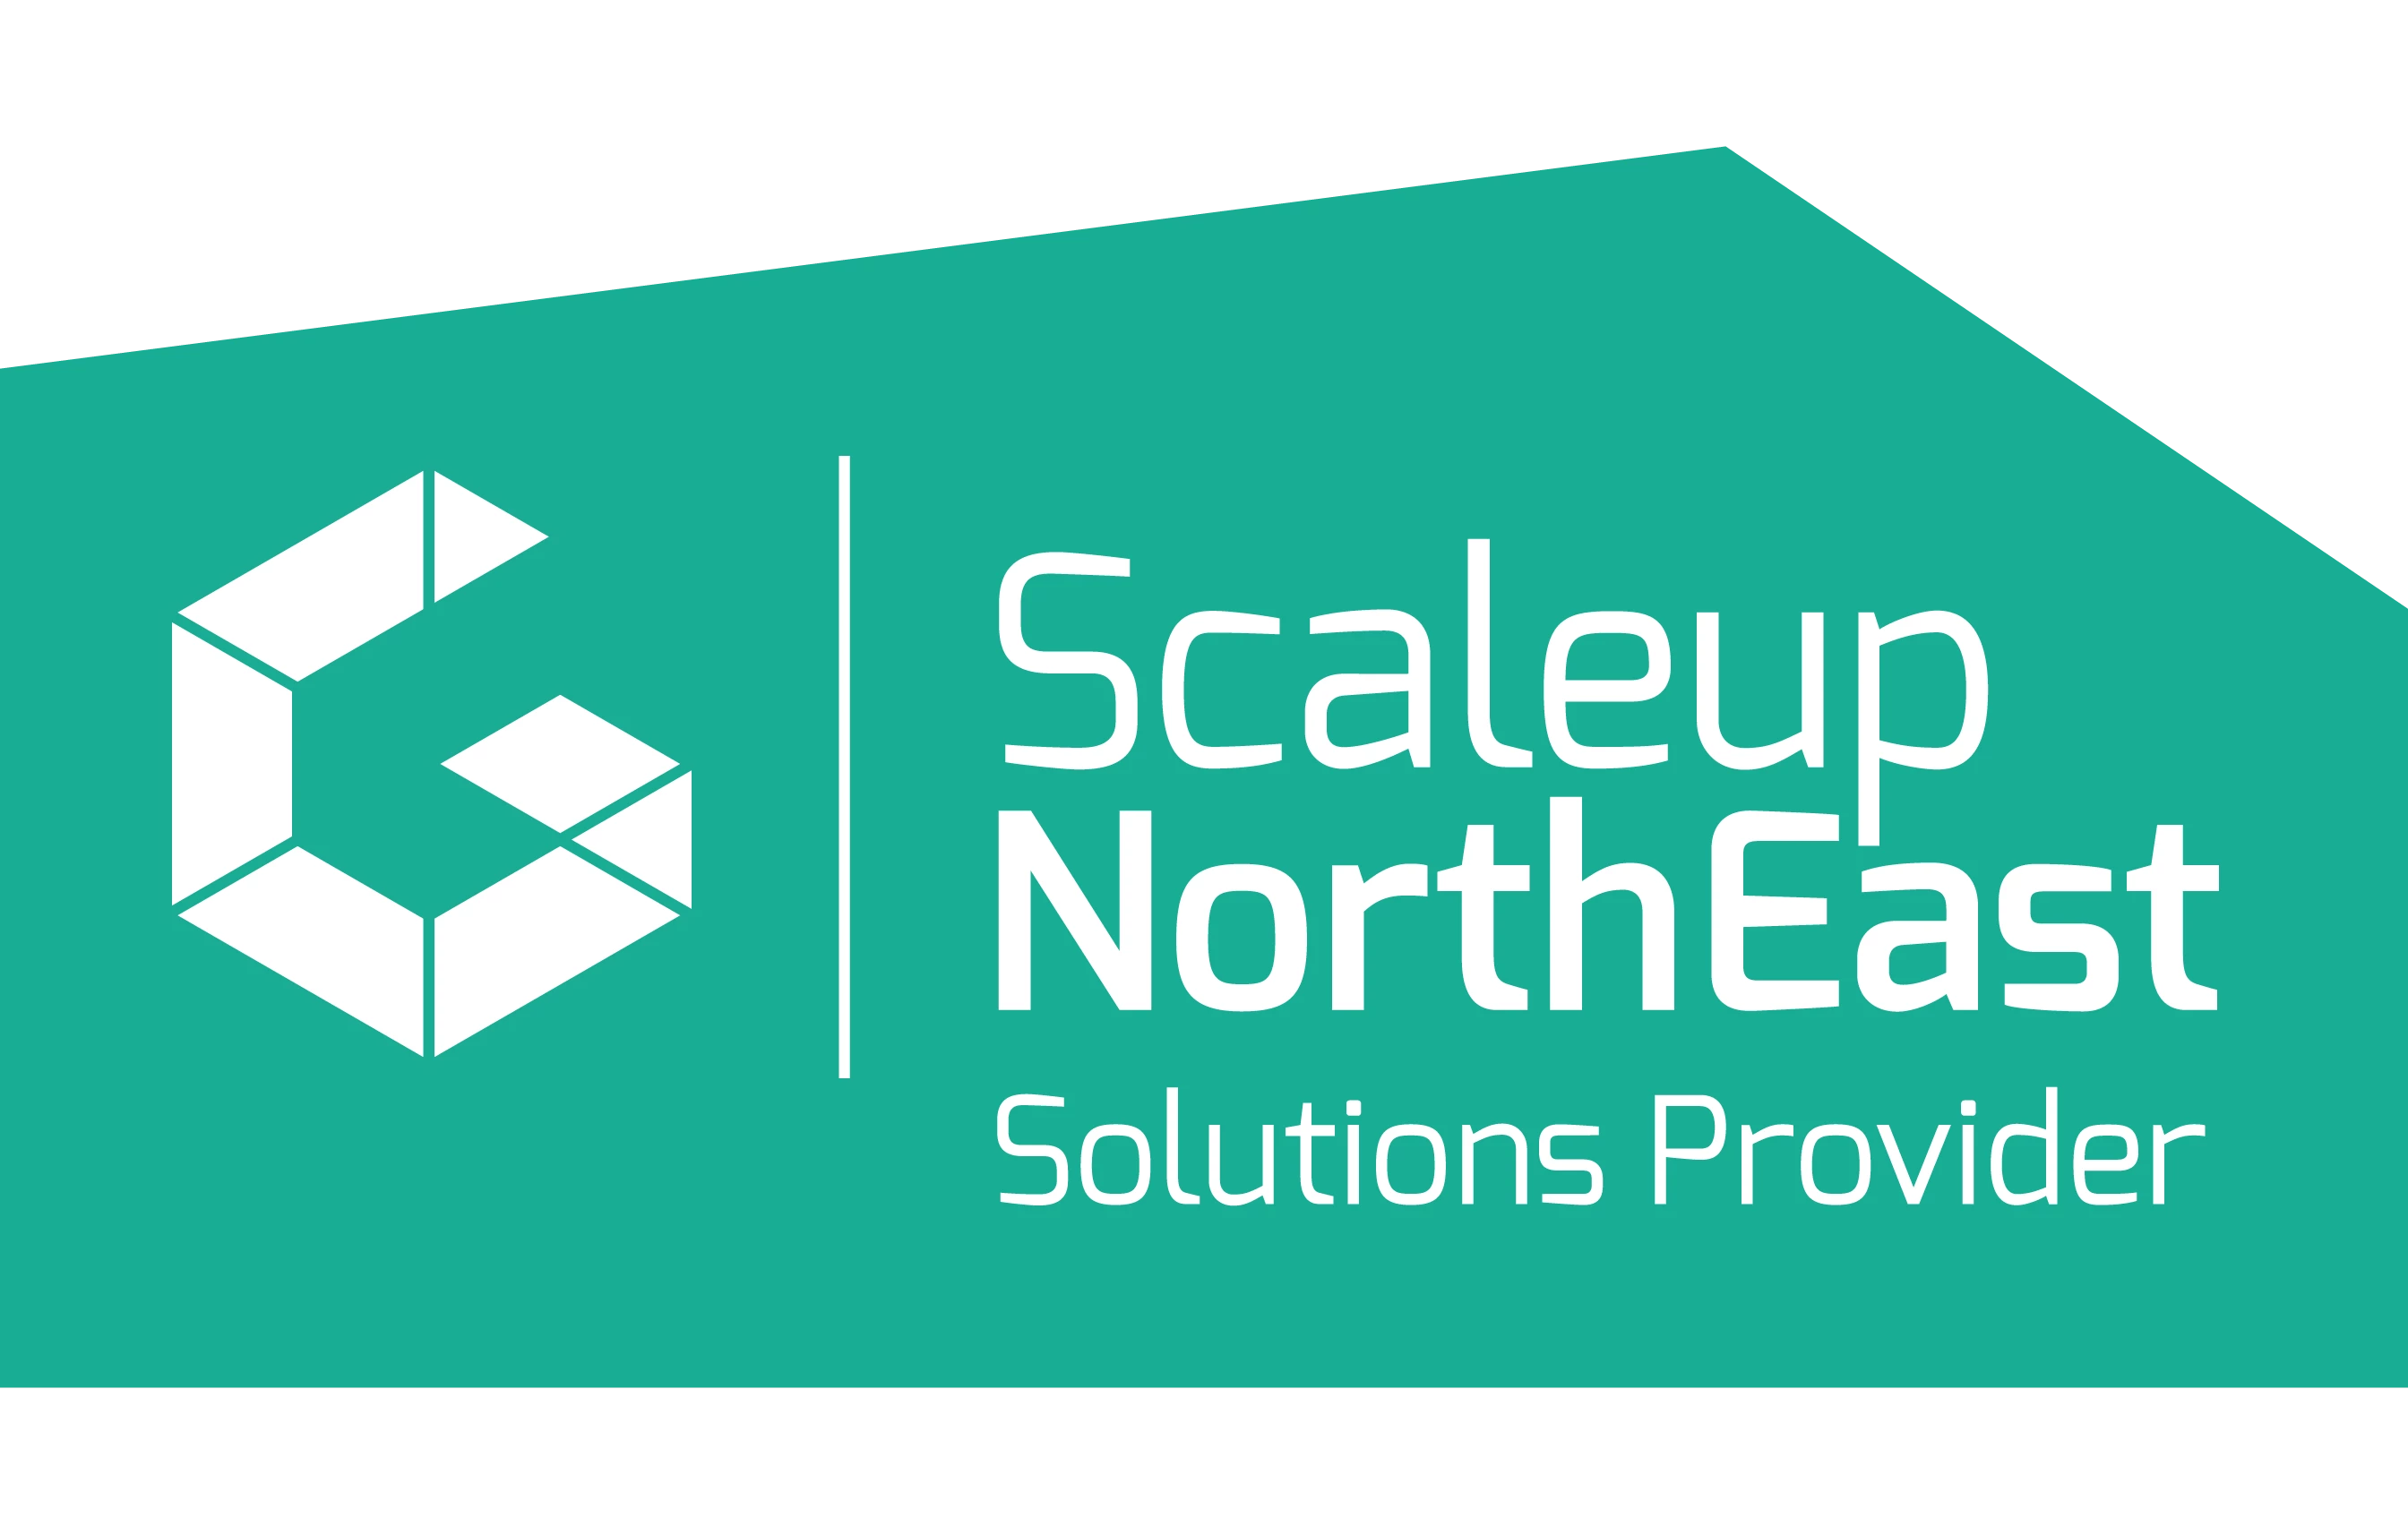 North East Scaleup Solution Provider